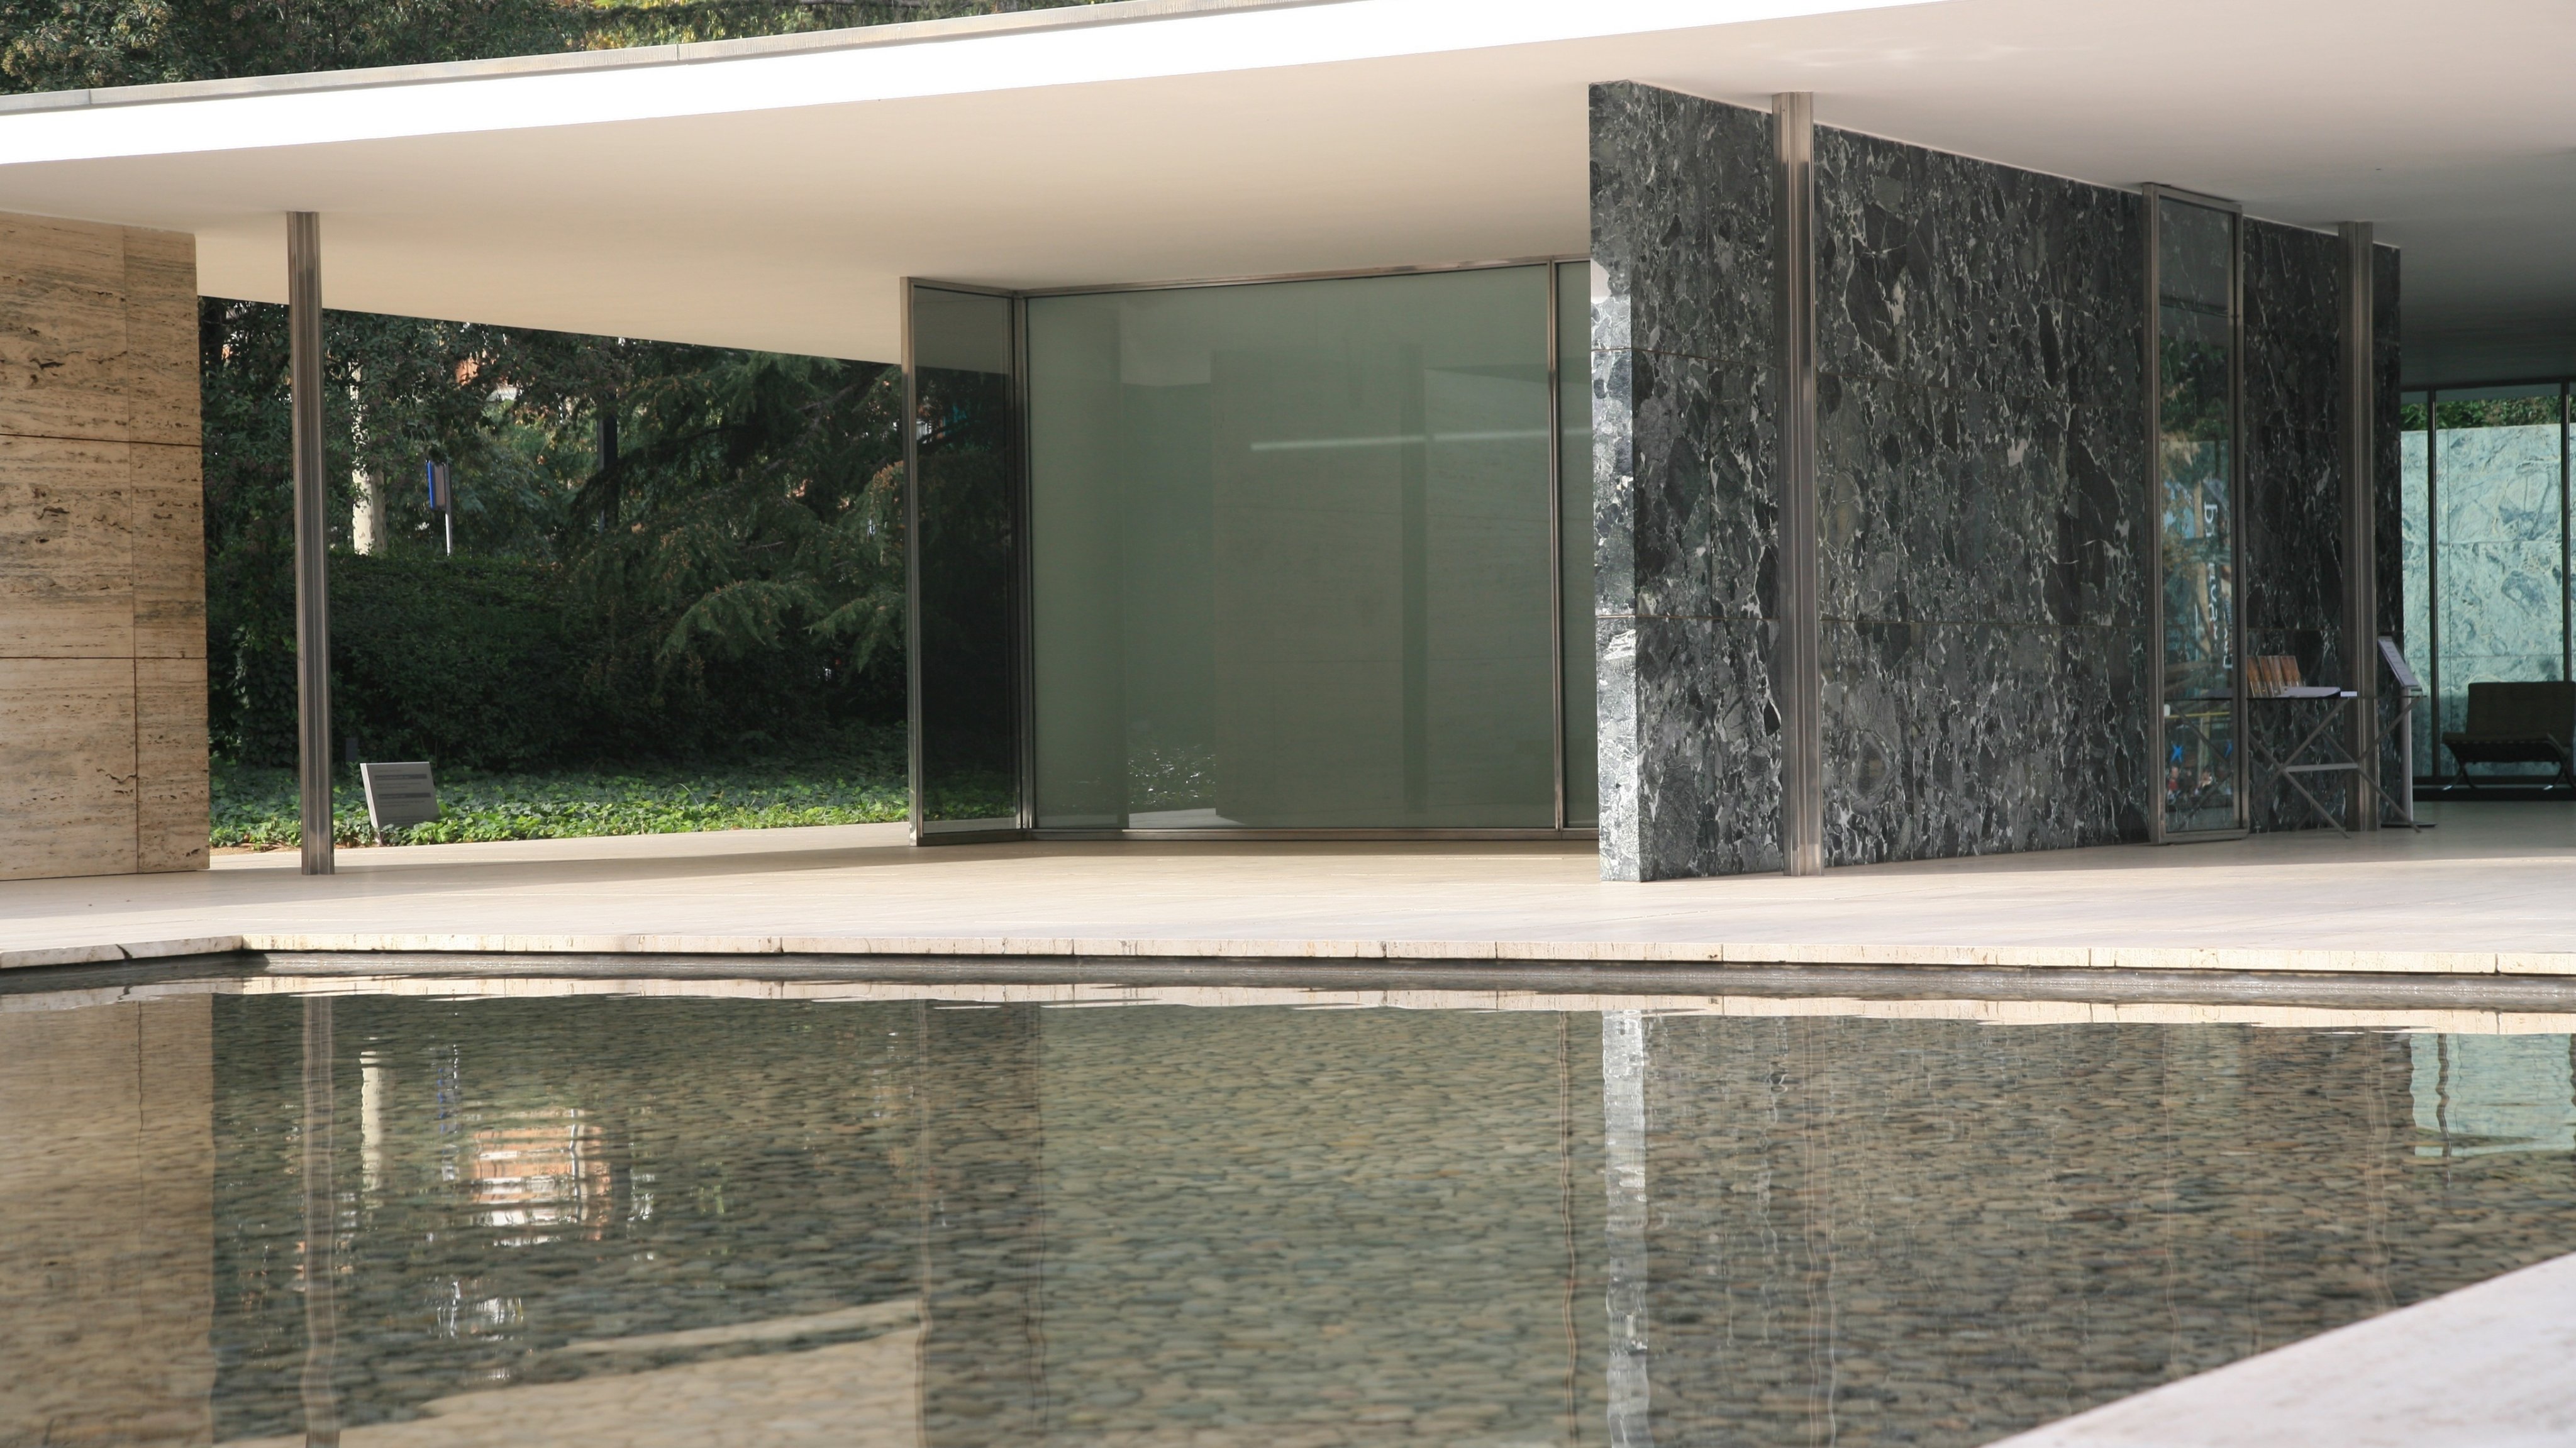 Europe, Spain, Barcelona: Barcelona Pavilion for the International exhibition 1929 built by Ludwig Mies van der Rohe - the big pool